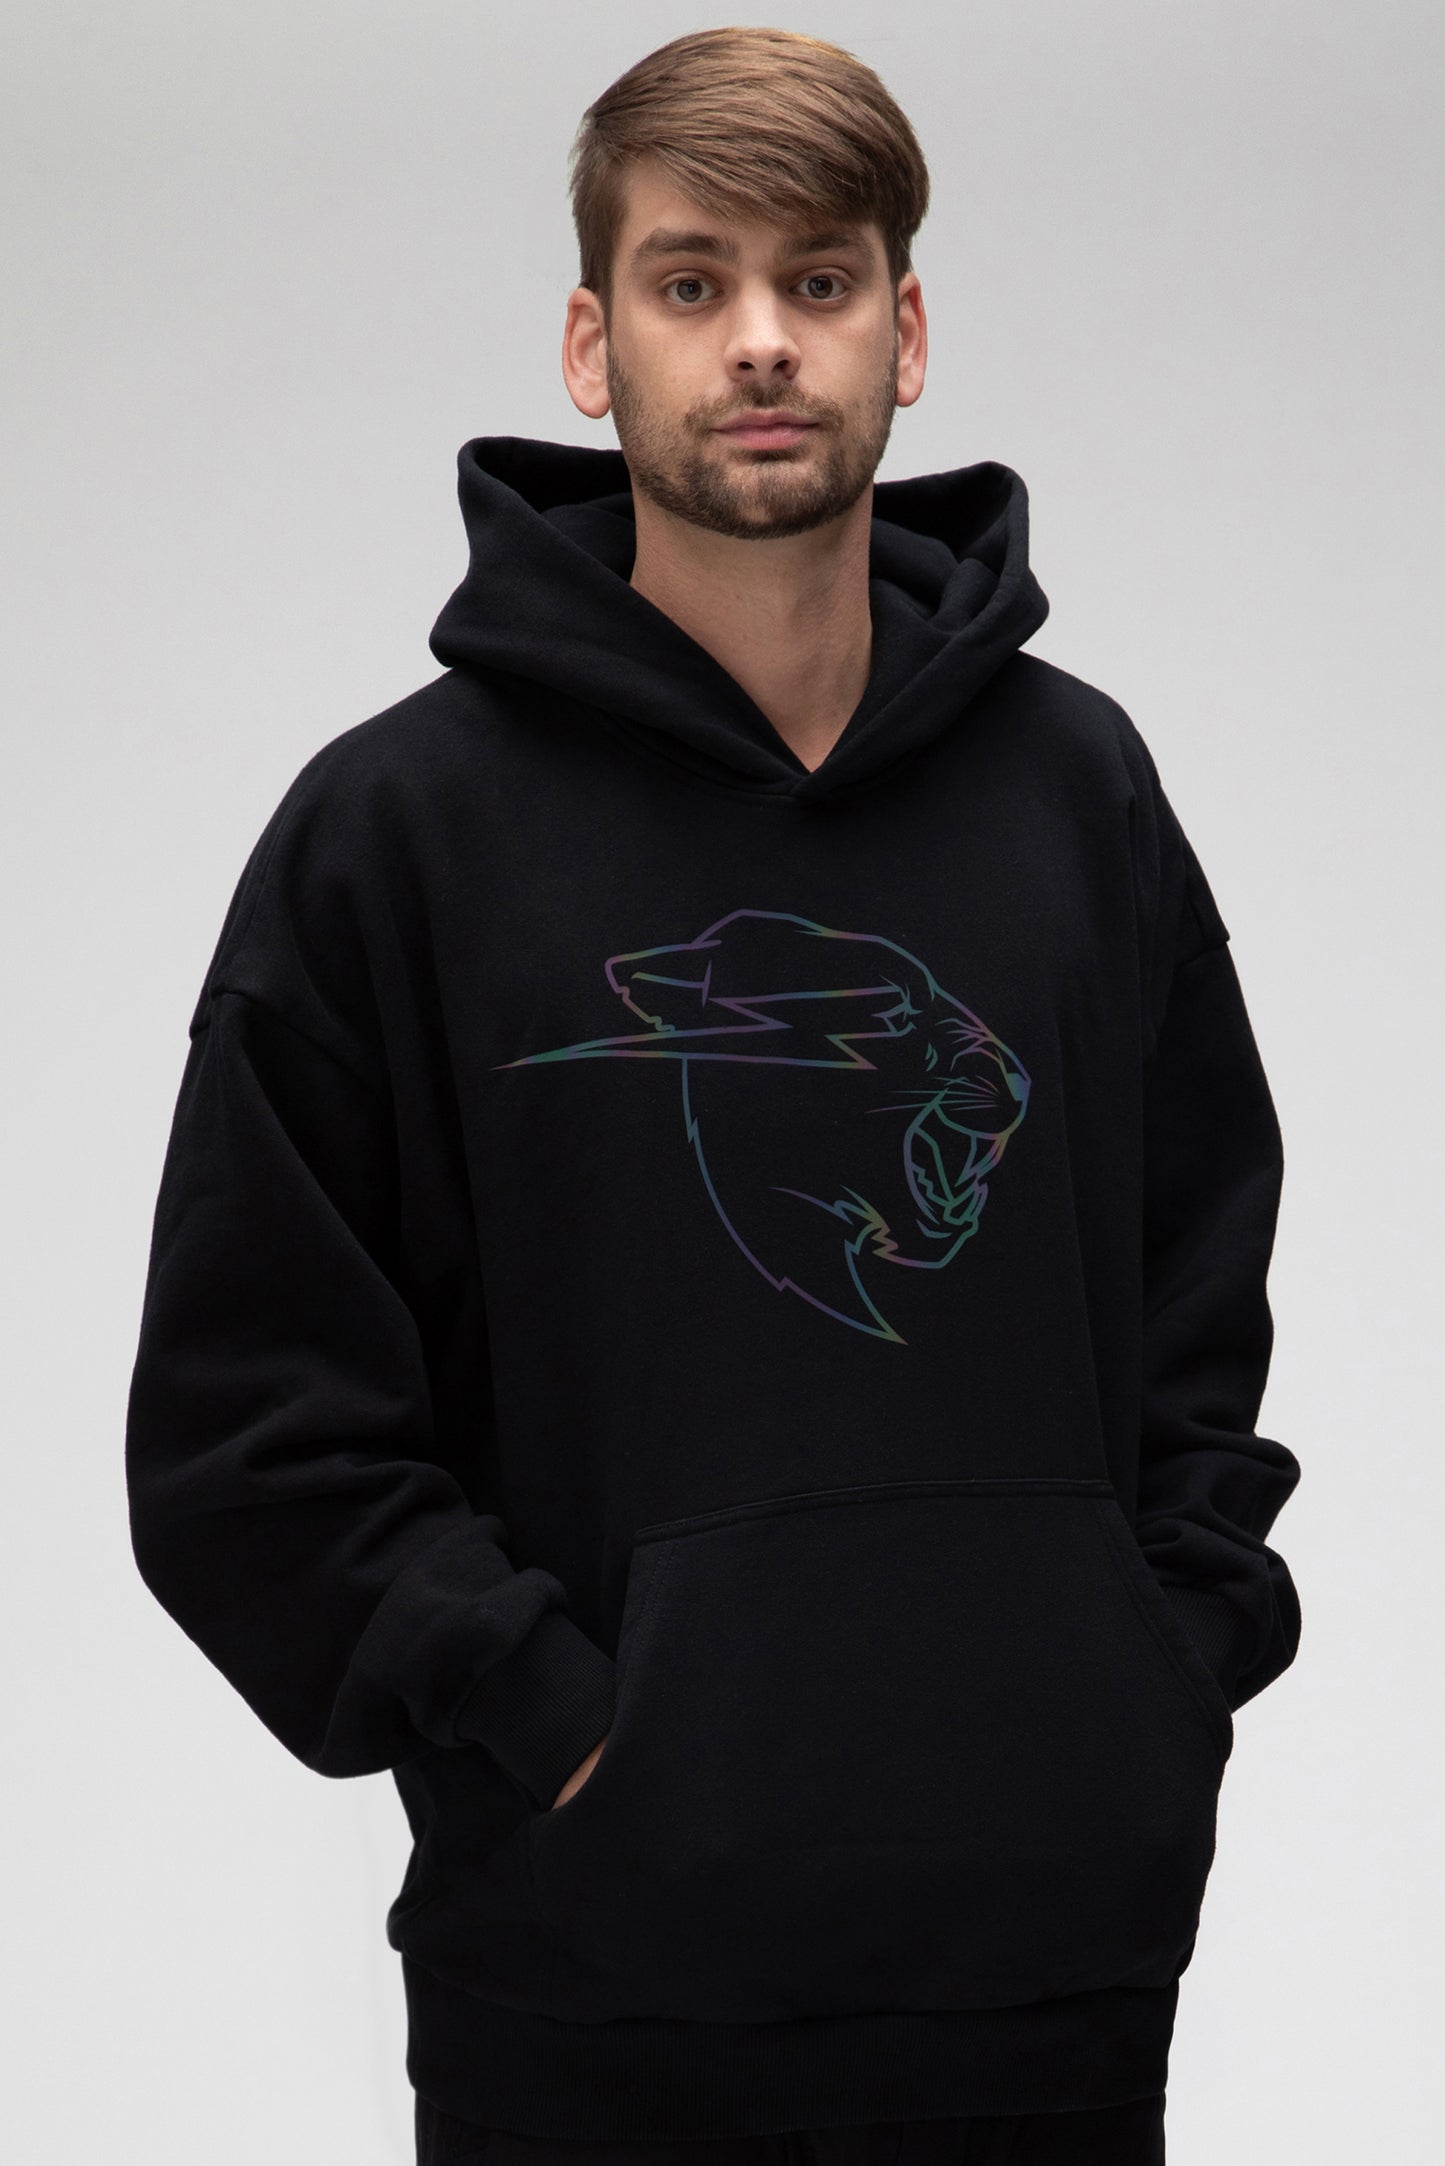 REFLECTIVE PANTHER HOODIE - BLACK